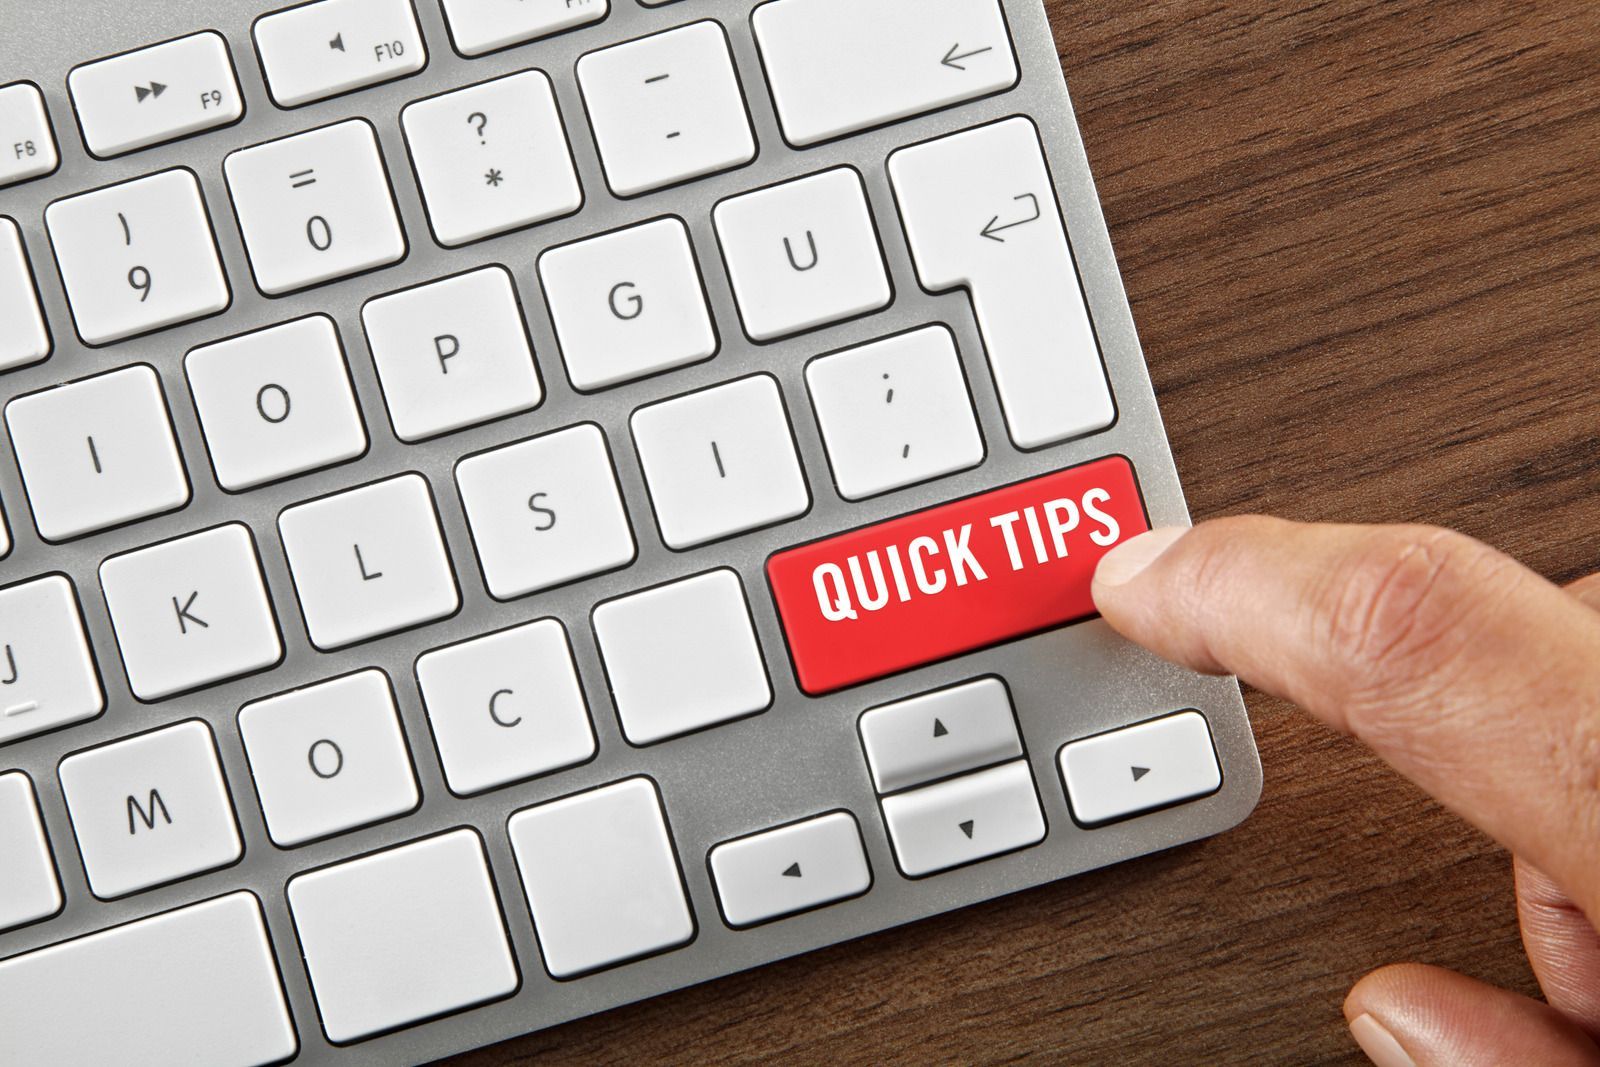 Quick Tips on Keyboard